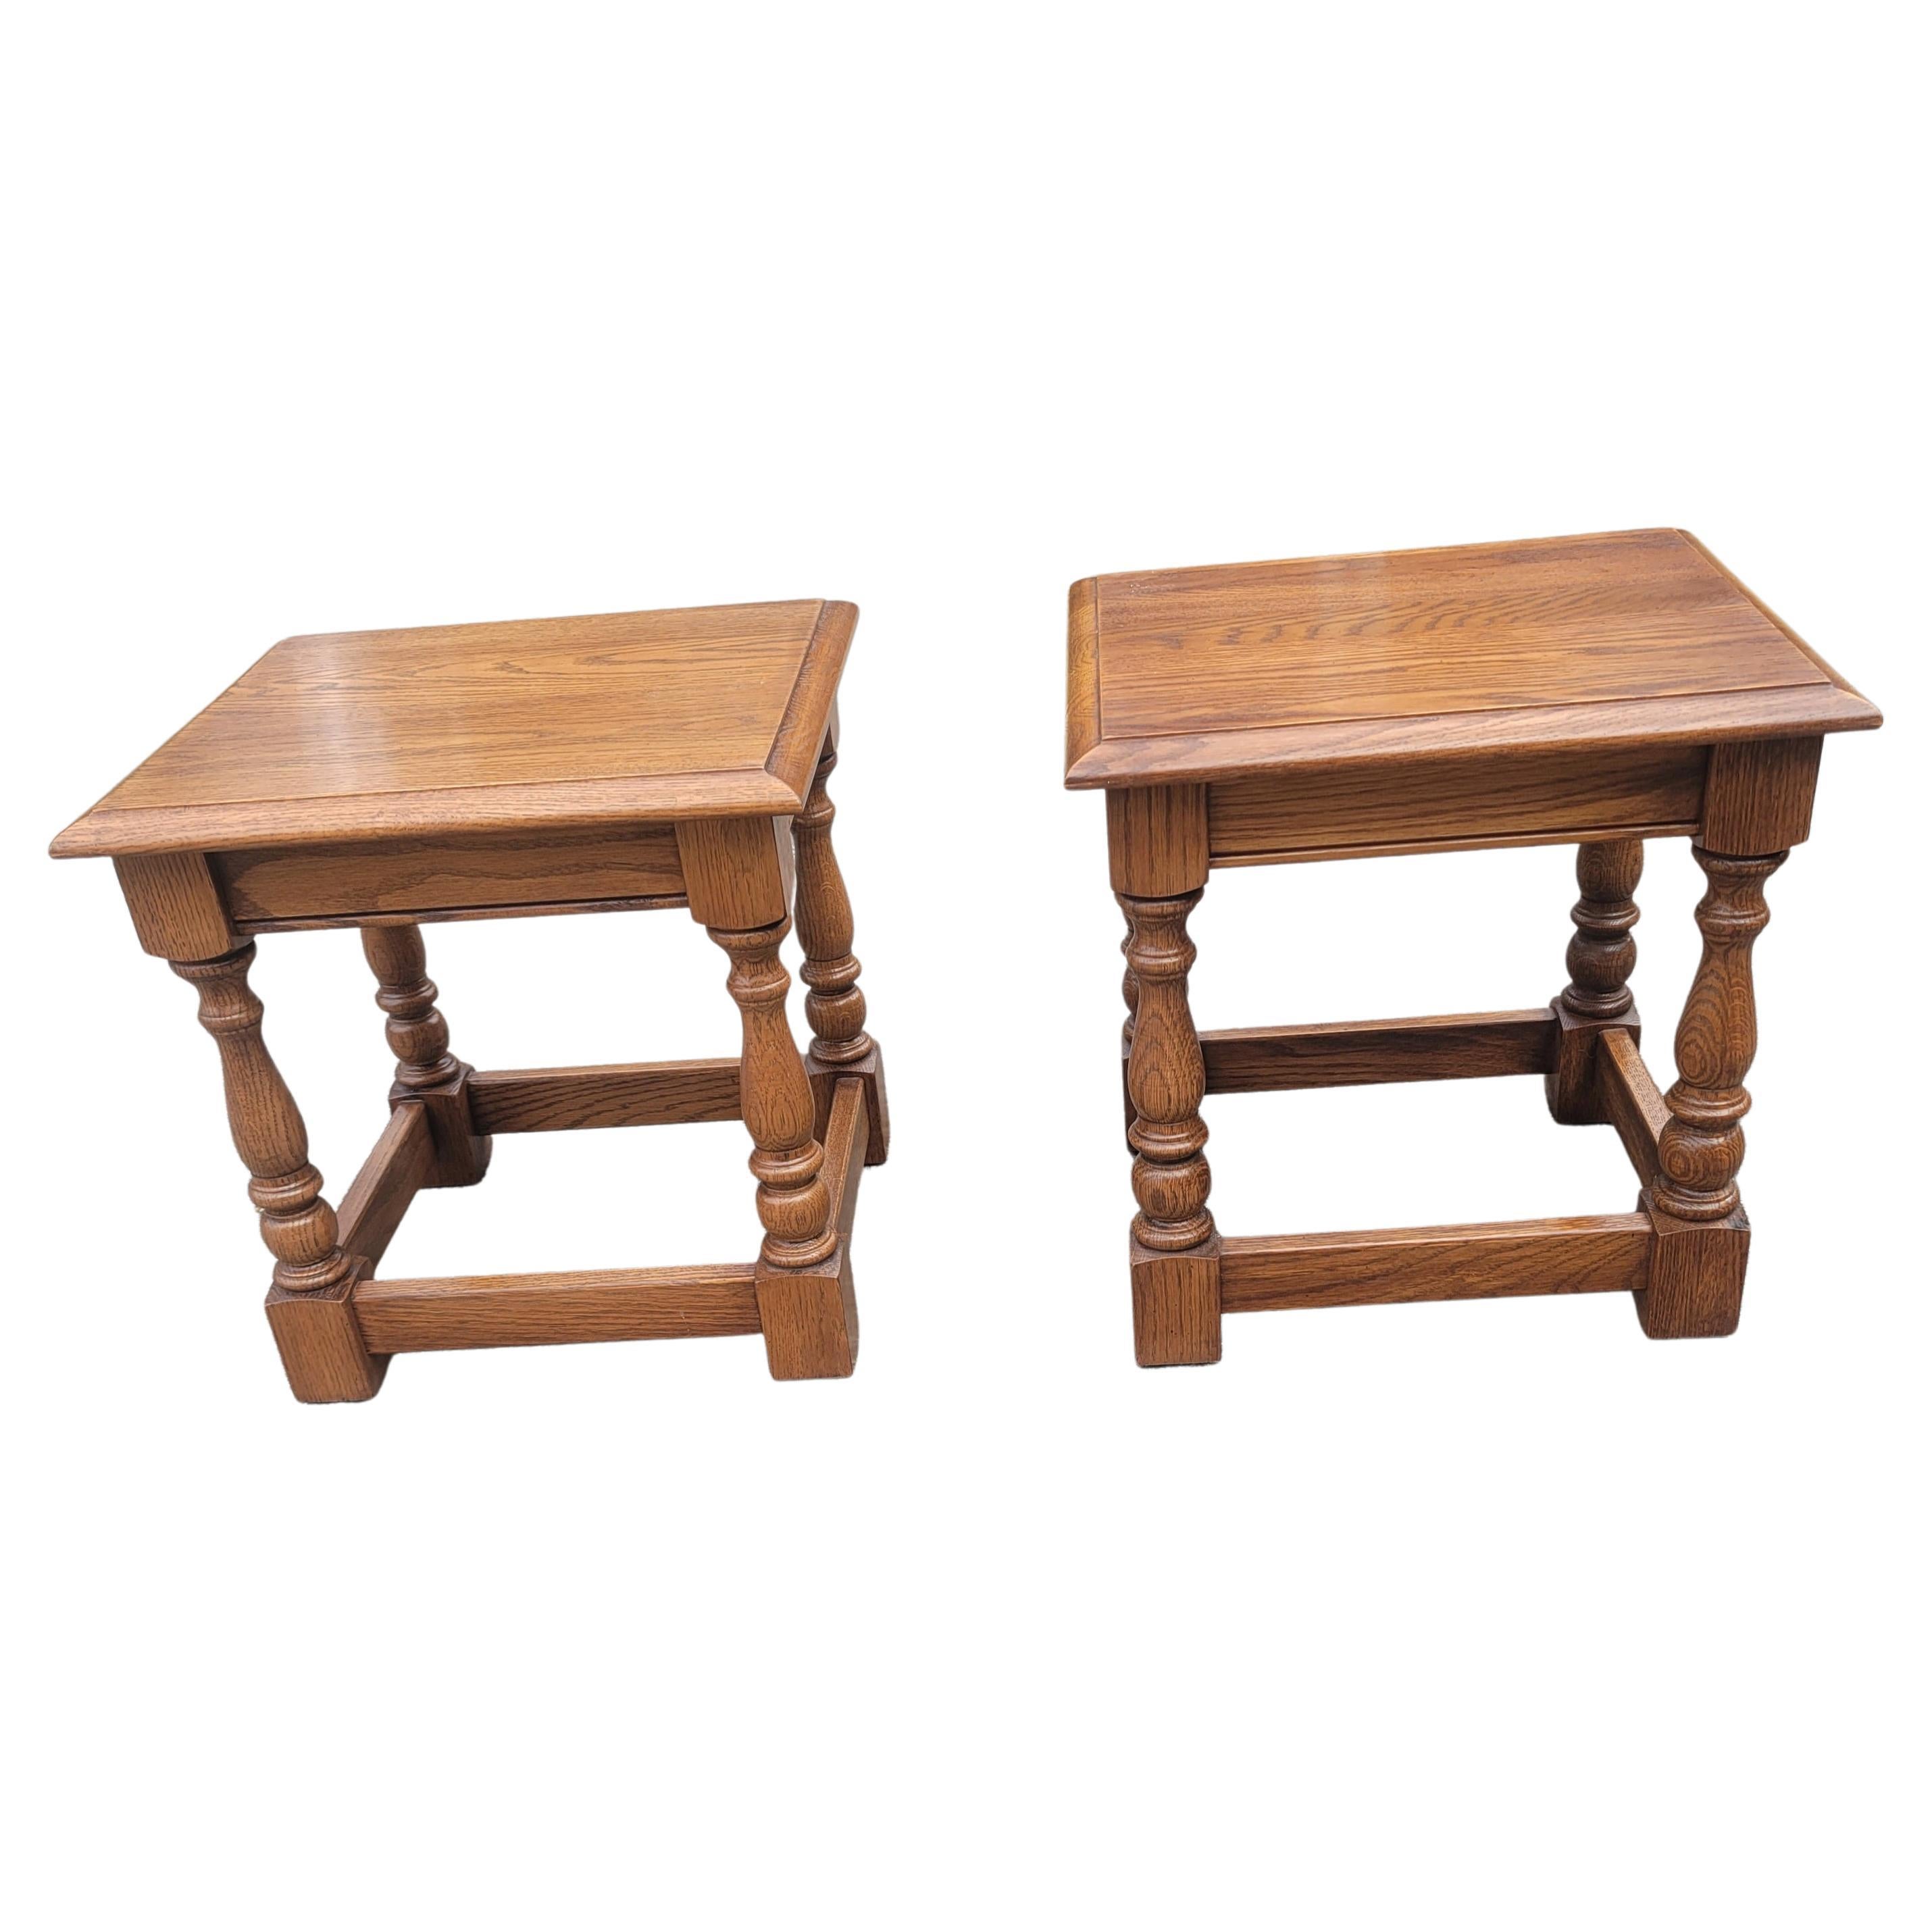 Country View Amish Handcrafted Mission Oak Low Stools For Sale